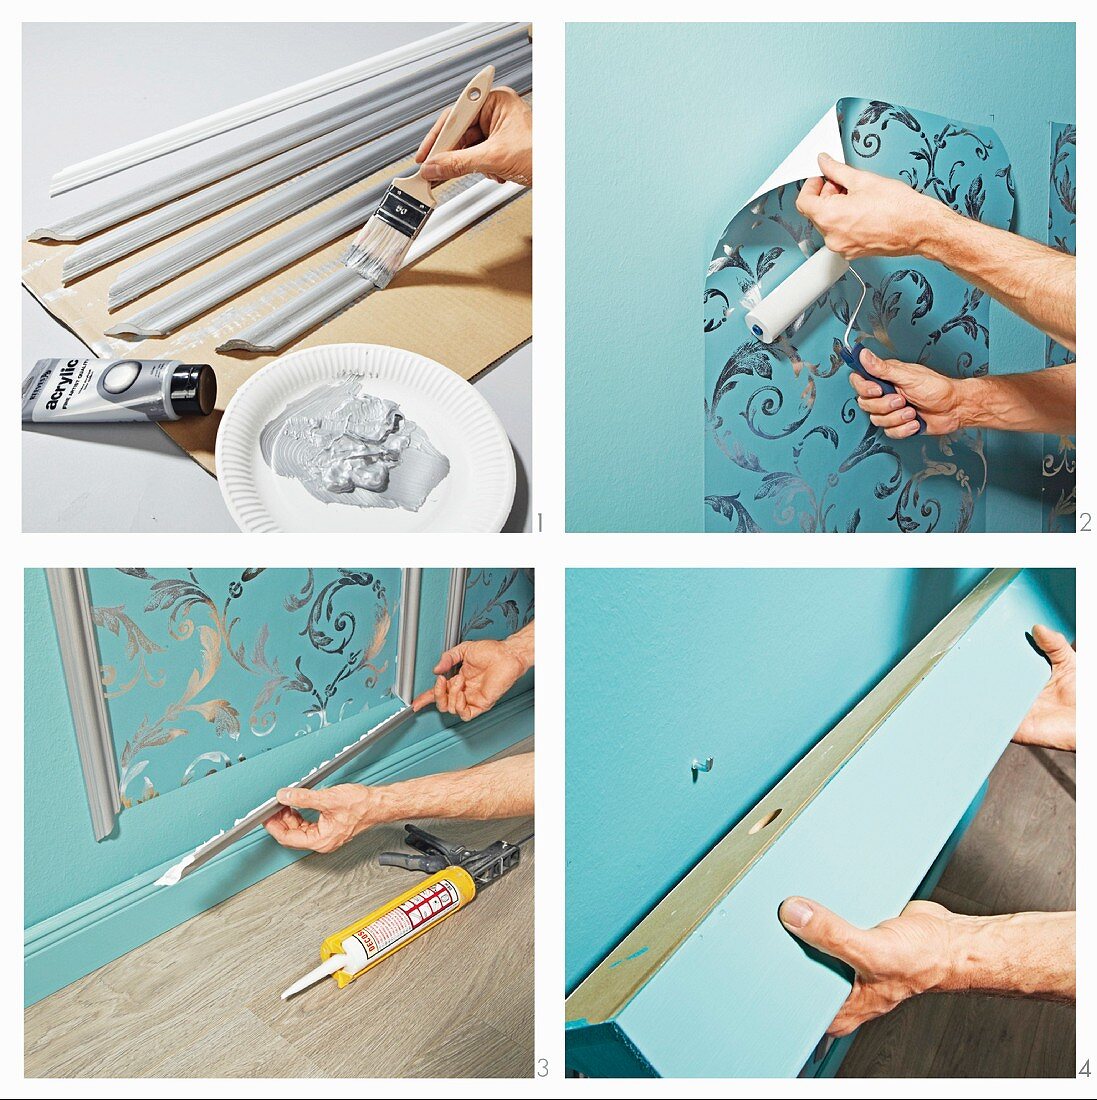 Instructions for decorating dado with patterned wallpaper and moulded trim